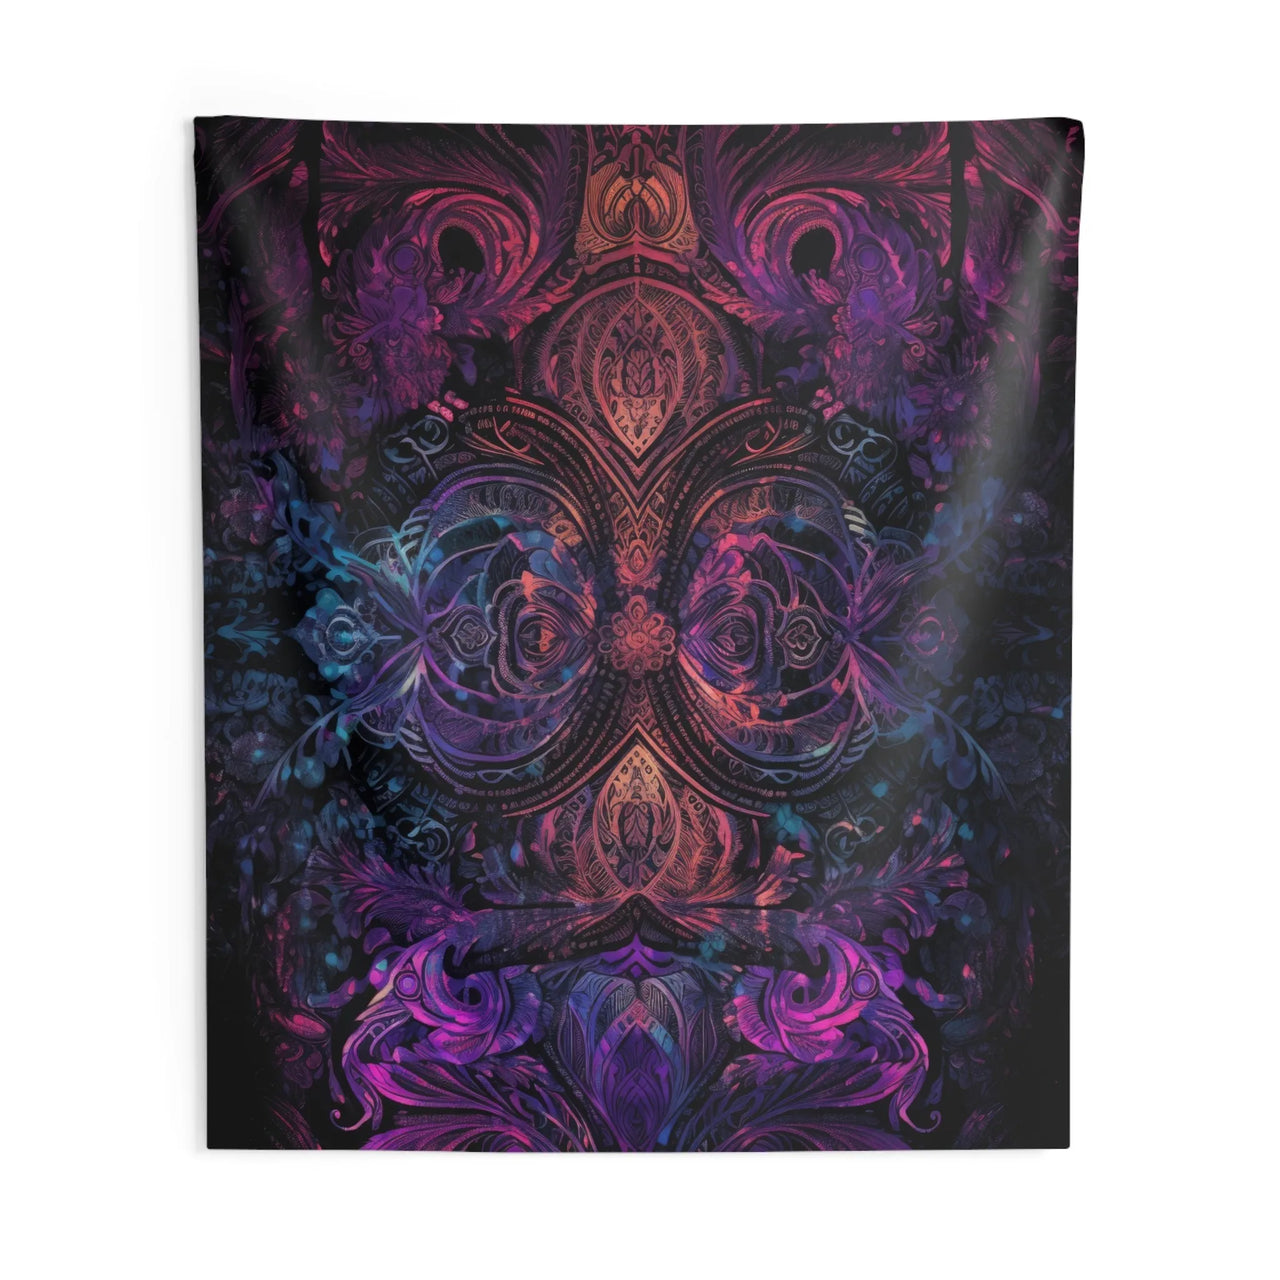 Camping Festival Celestial Radiance Tapestry - GroovyGallery